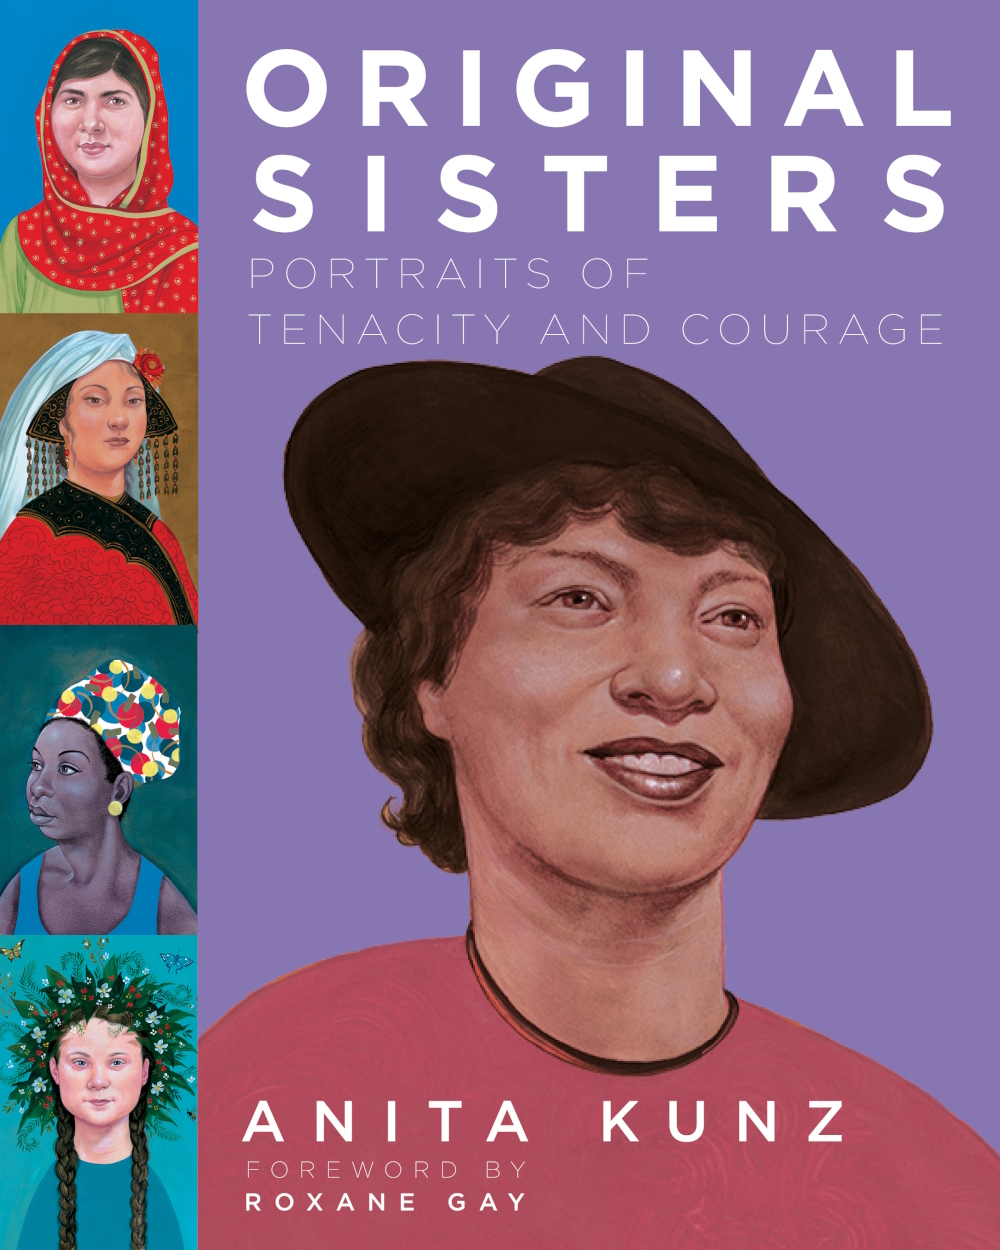 Cover of book 'Original Sisters: Portraits of Tenacity and Courage'. During the pandemic COVID-19 Anita Kunz painted 400 portraits of women to know.